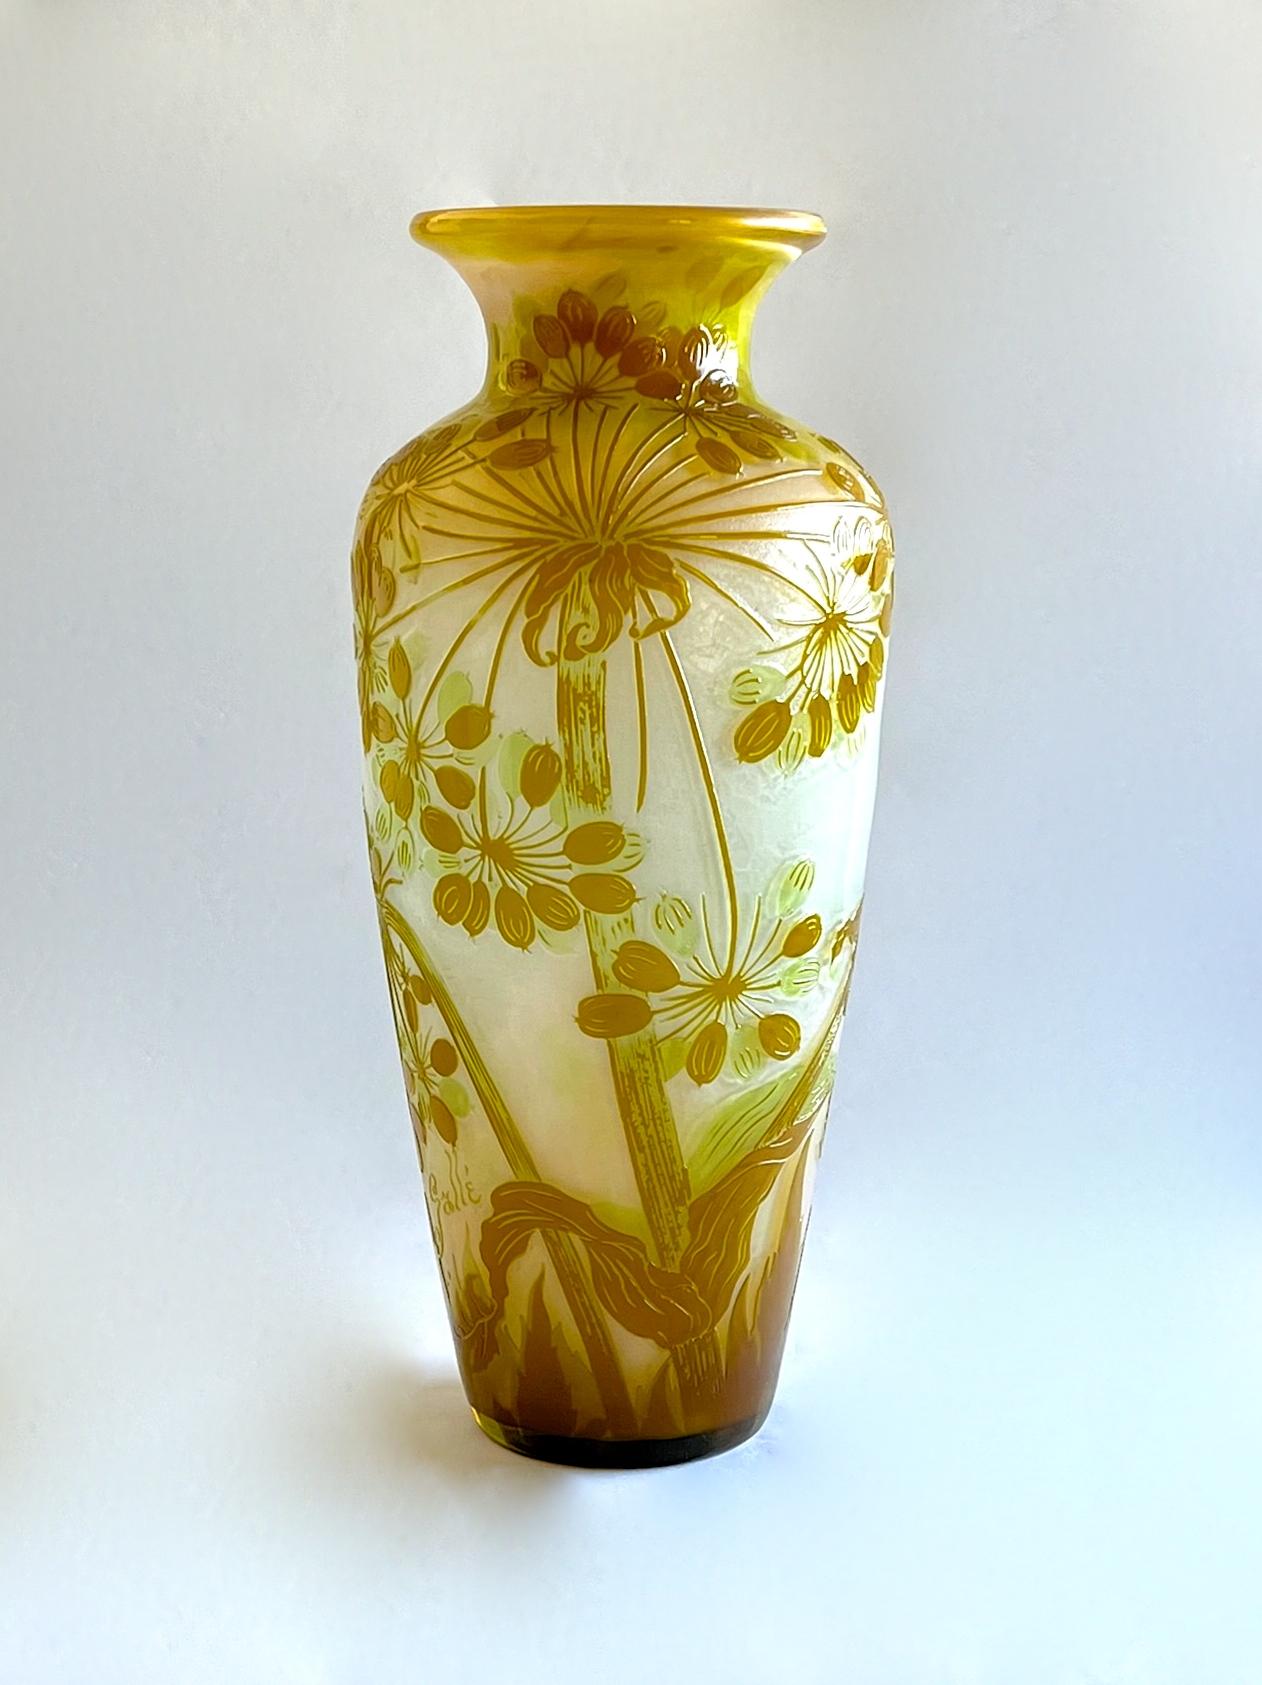 A fine, rare and large cameo glass vase of baluster form. The white and rose coloured ground overlaid with green and a honey colour then acid etched and wheel carved with a design of Umbel flowers. The ground surface is textured and entire vase is